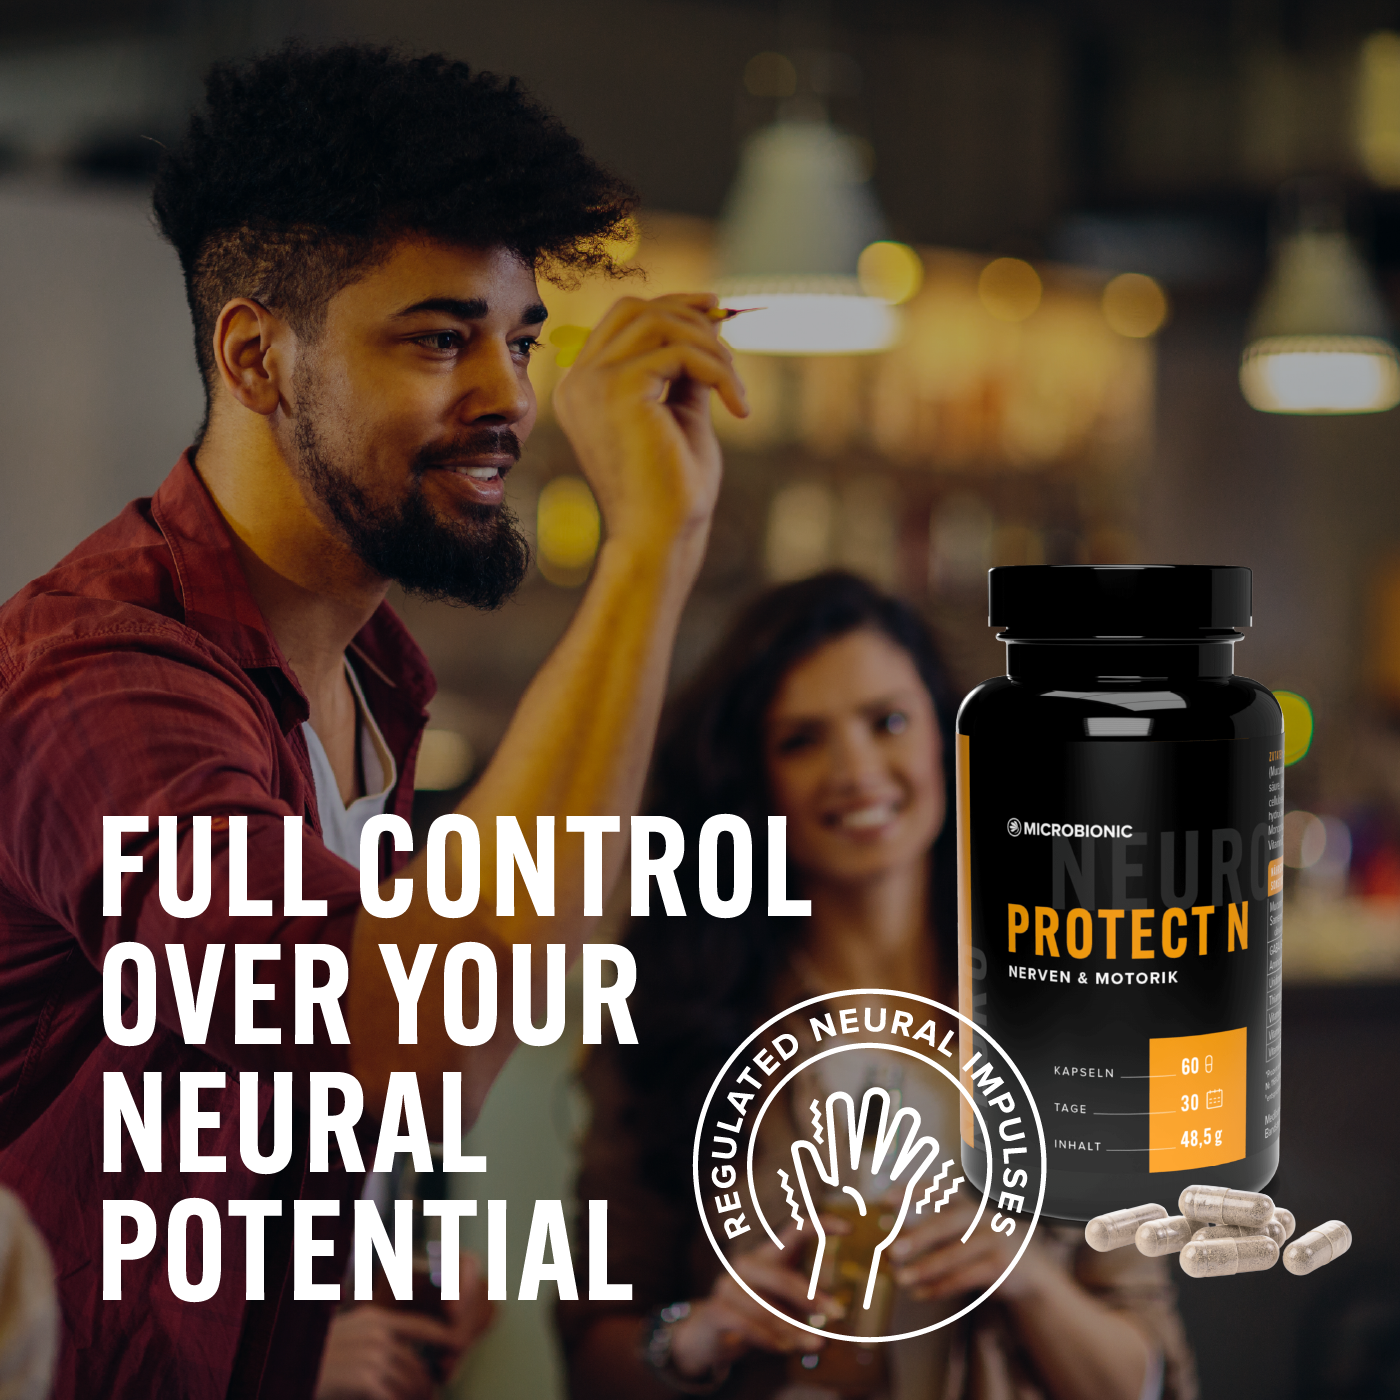 Protect N – Full control over neural potential